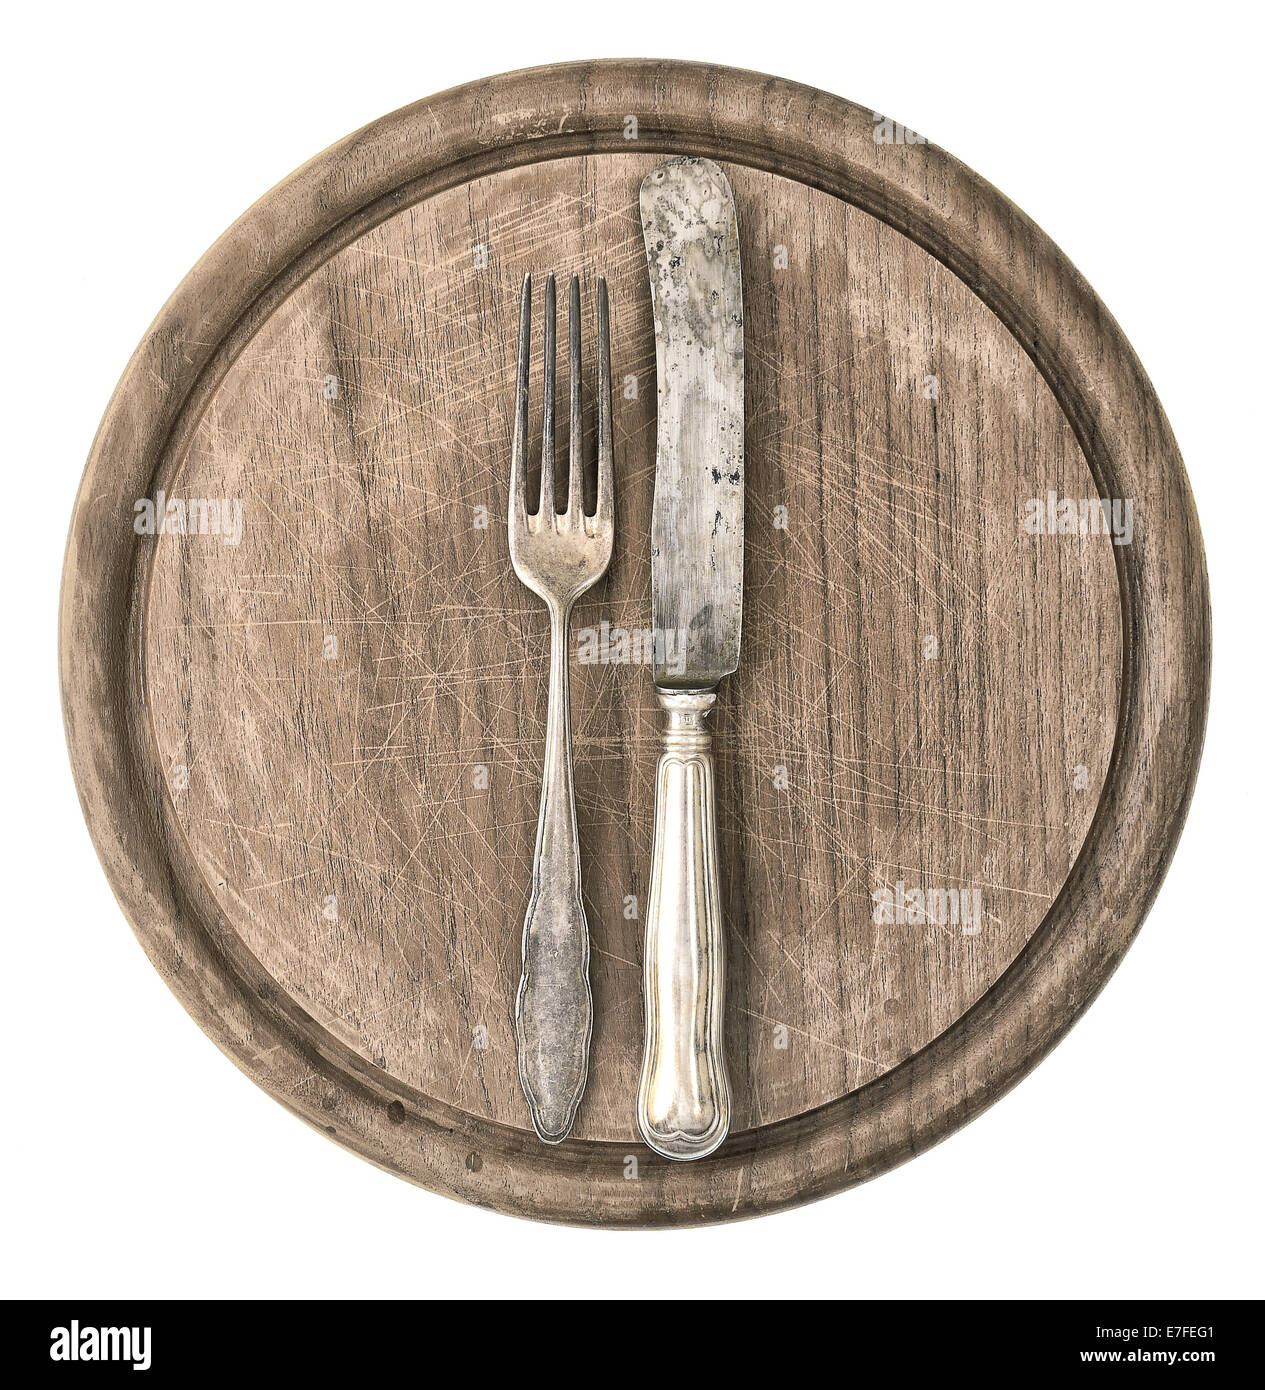 rustic wooden board with antique knife and fork isolated on white background. kitchen utensil and vintage silver cutlery Stock Photo